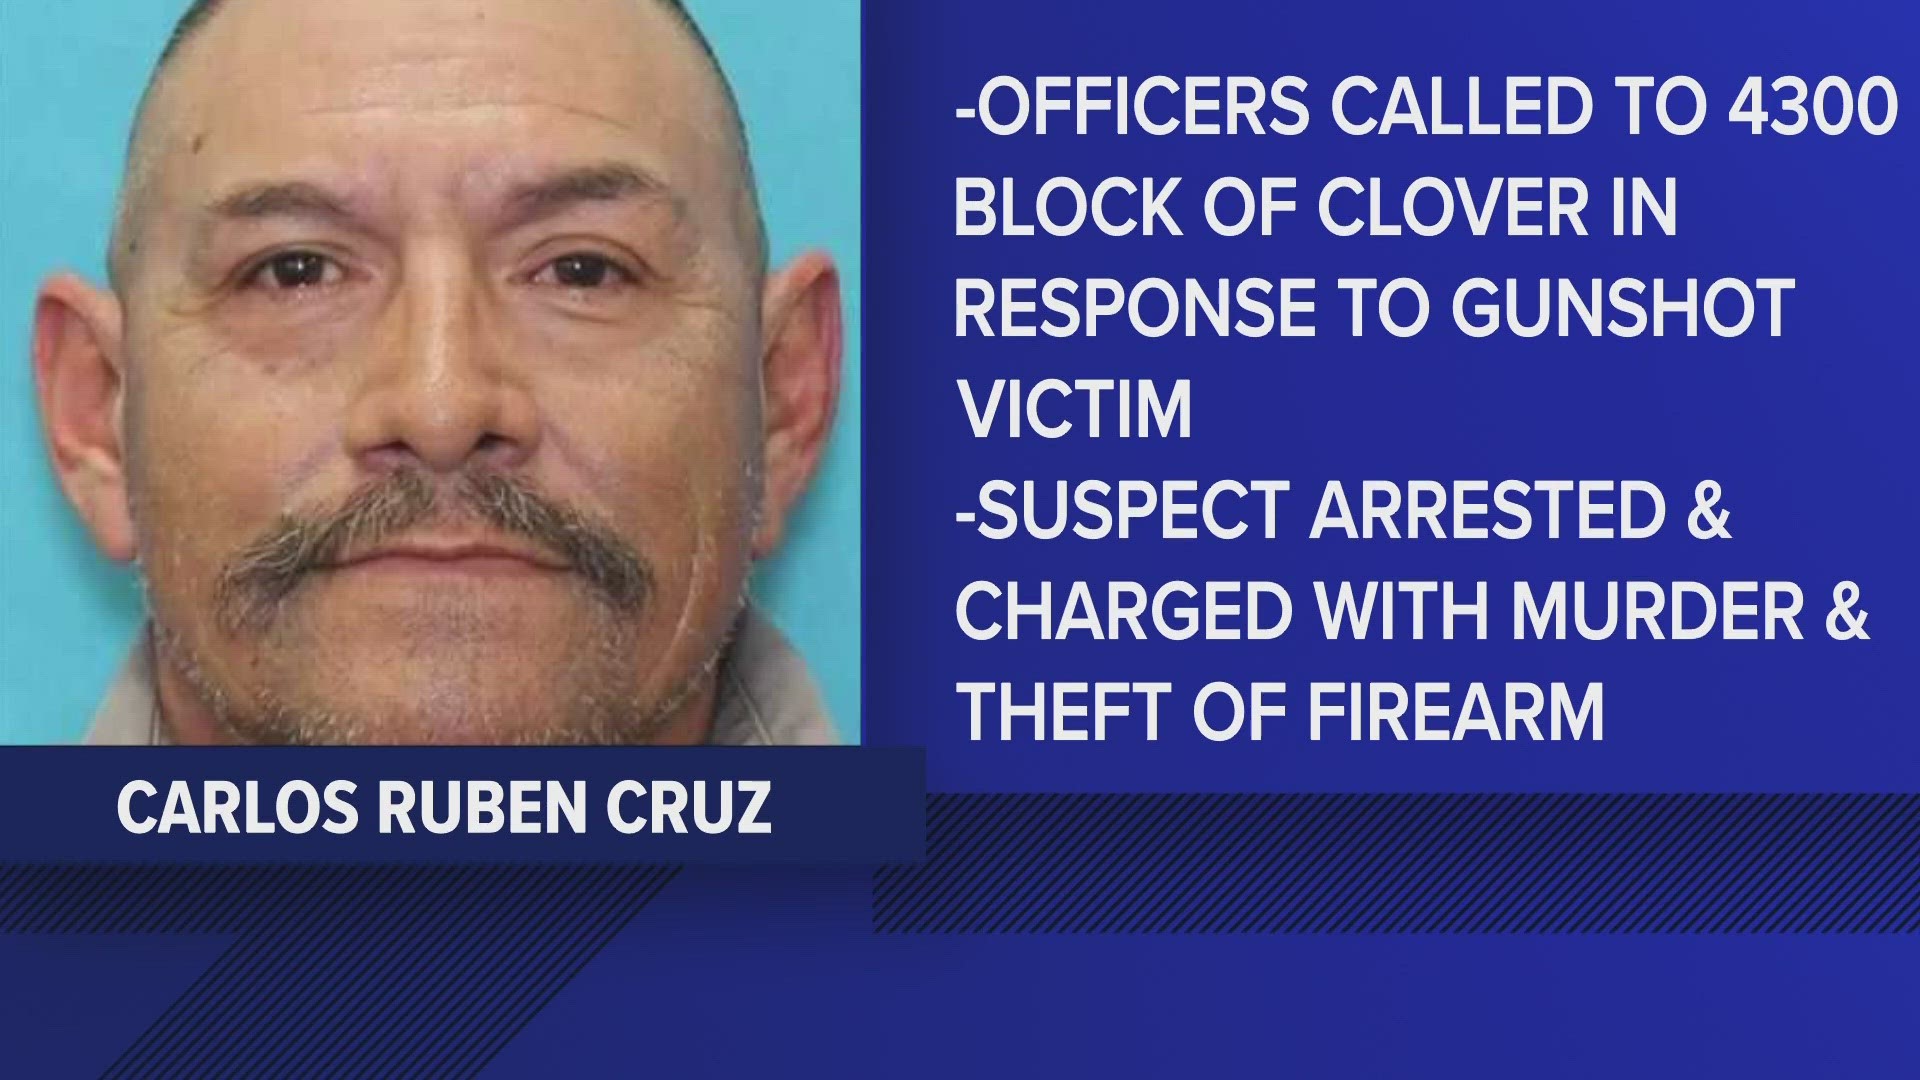 57-year-old Odessan, Carlos Ruben Cruz, was arrested and charged with murder by the Odessa Police Department. This comes after the deadly shooting Tuesday.